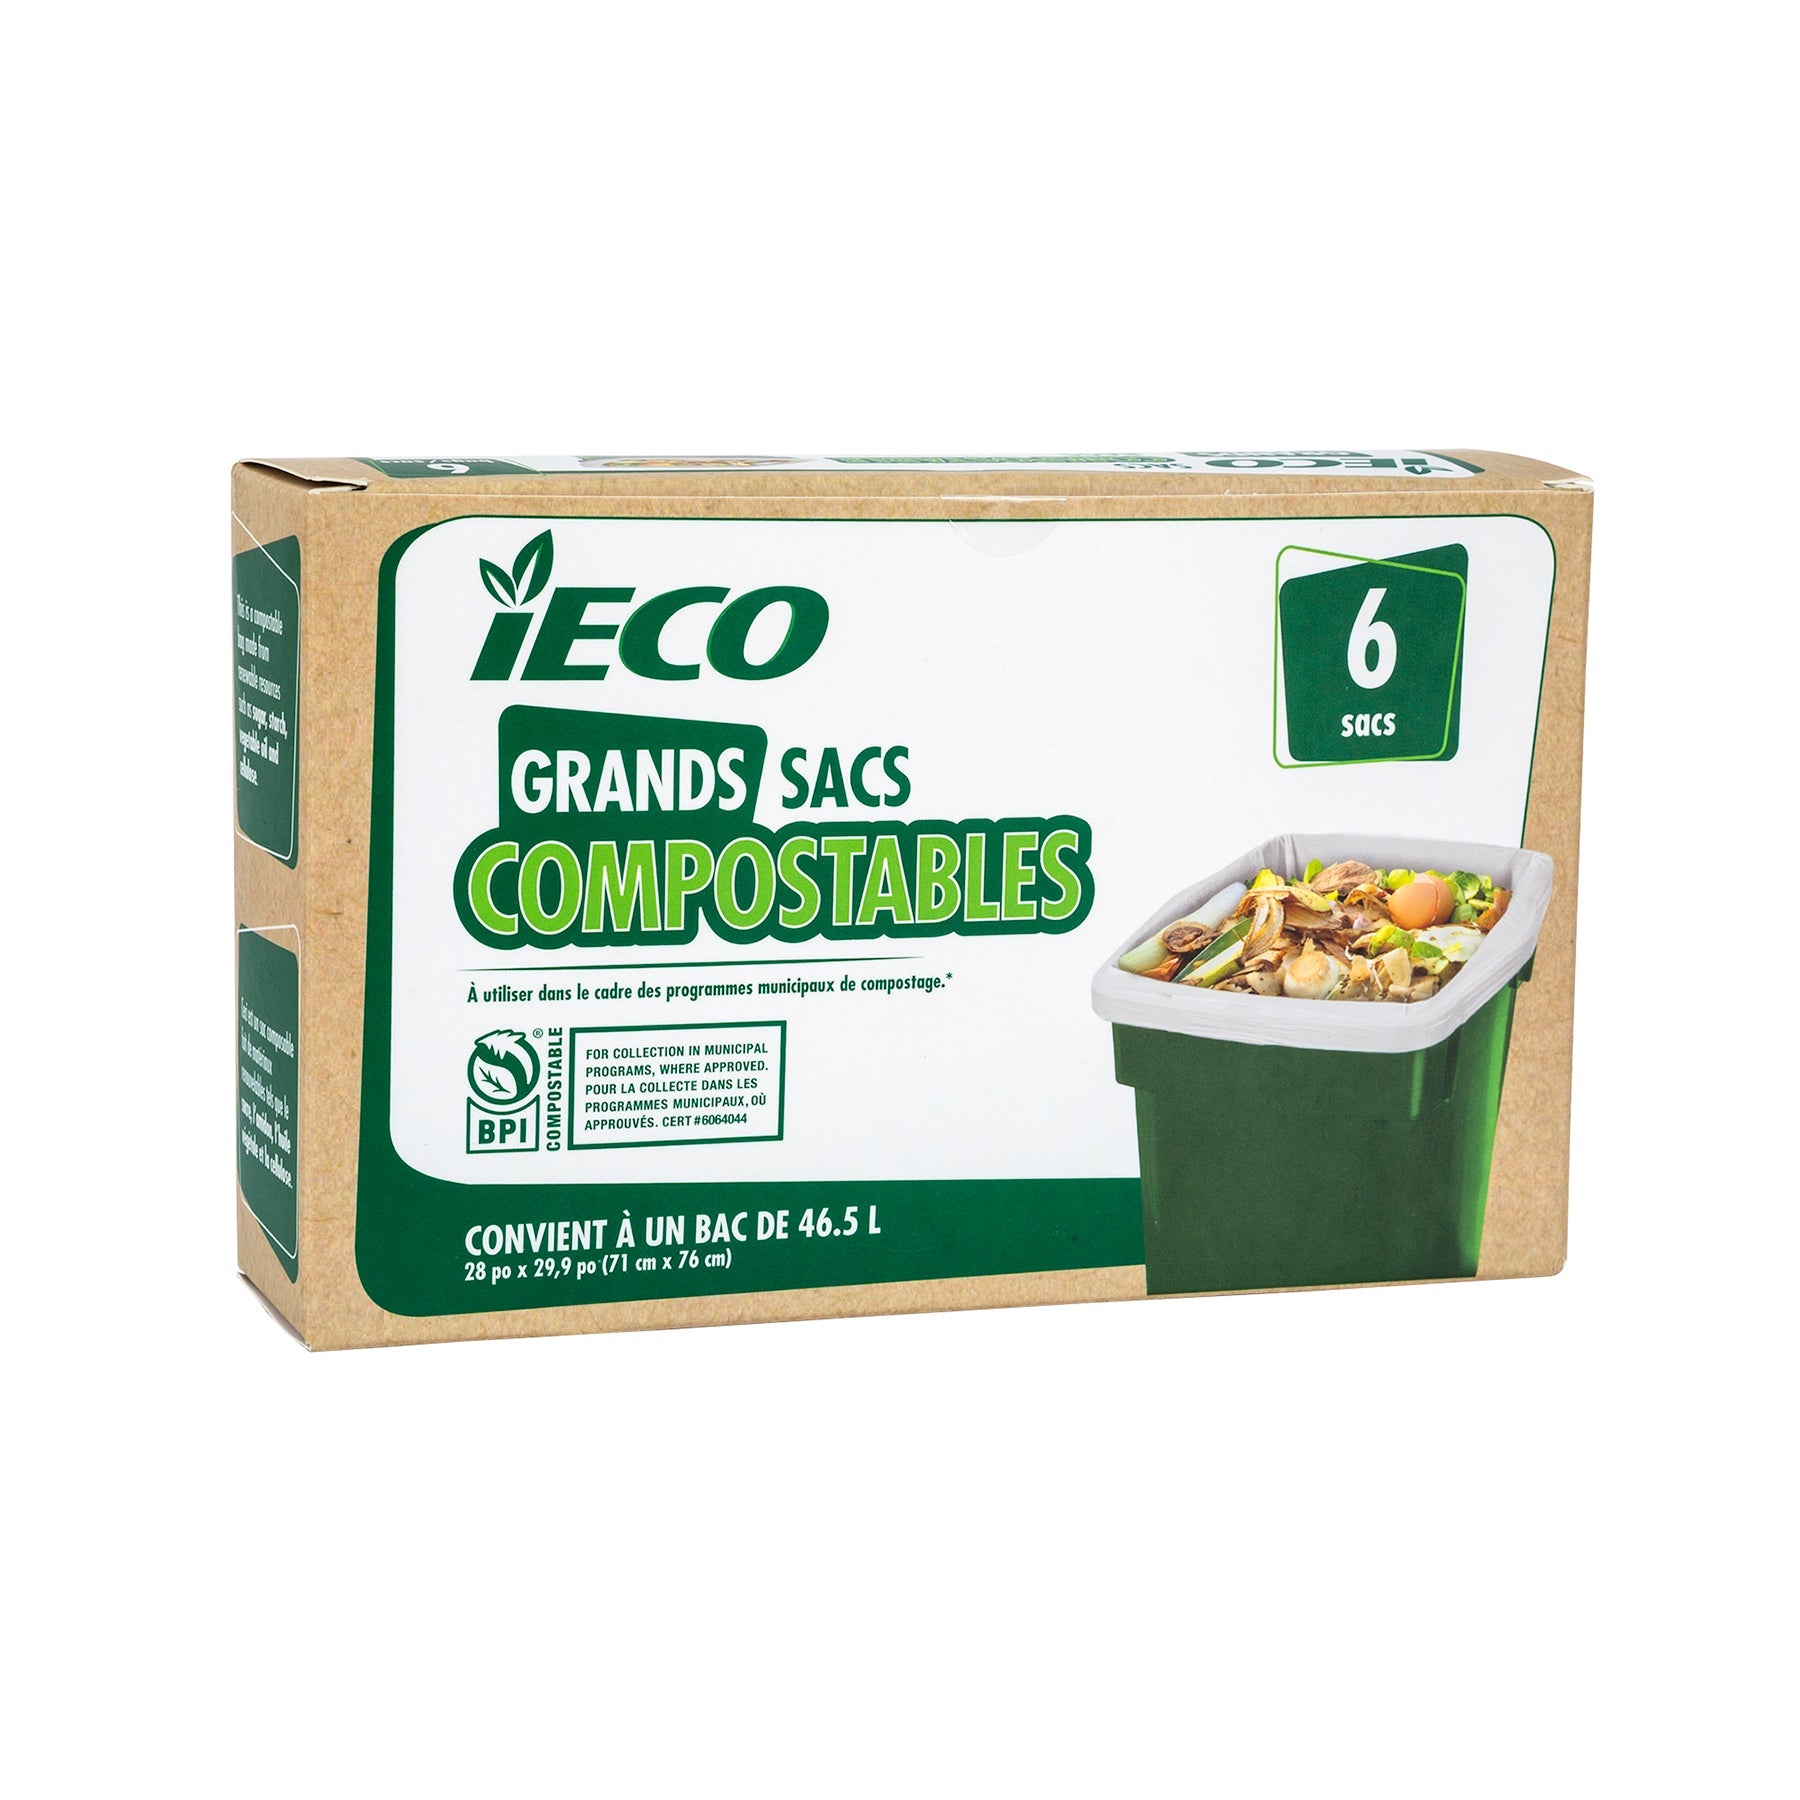 iEco 6 Tall Compostable Bags 28x29.9in